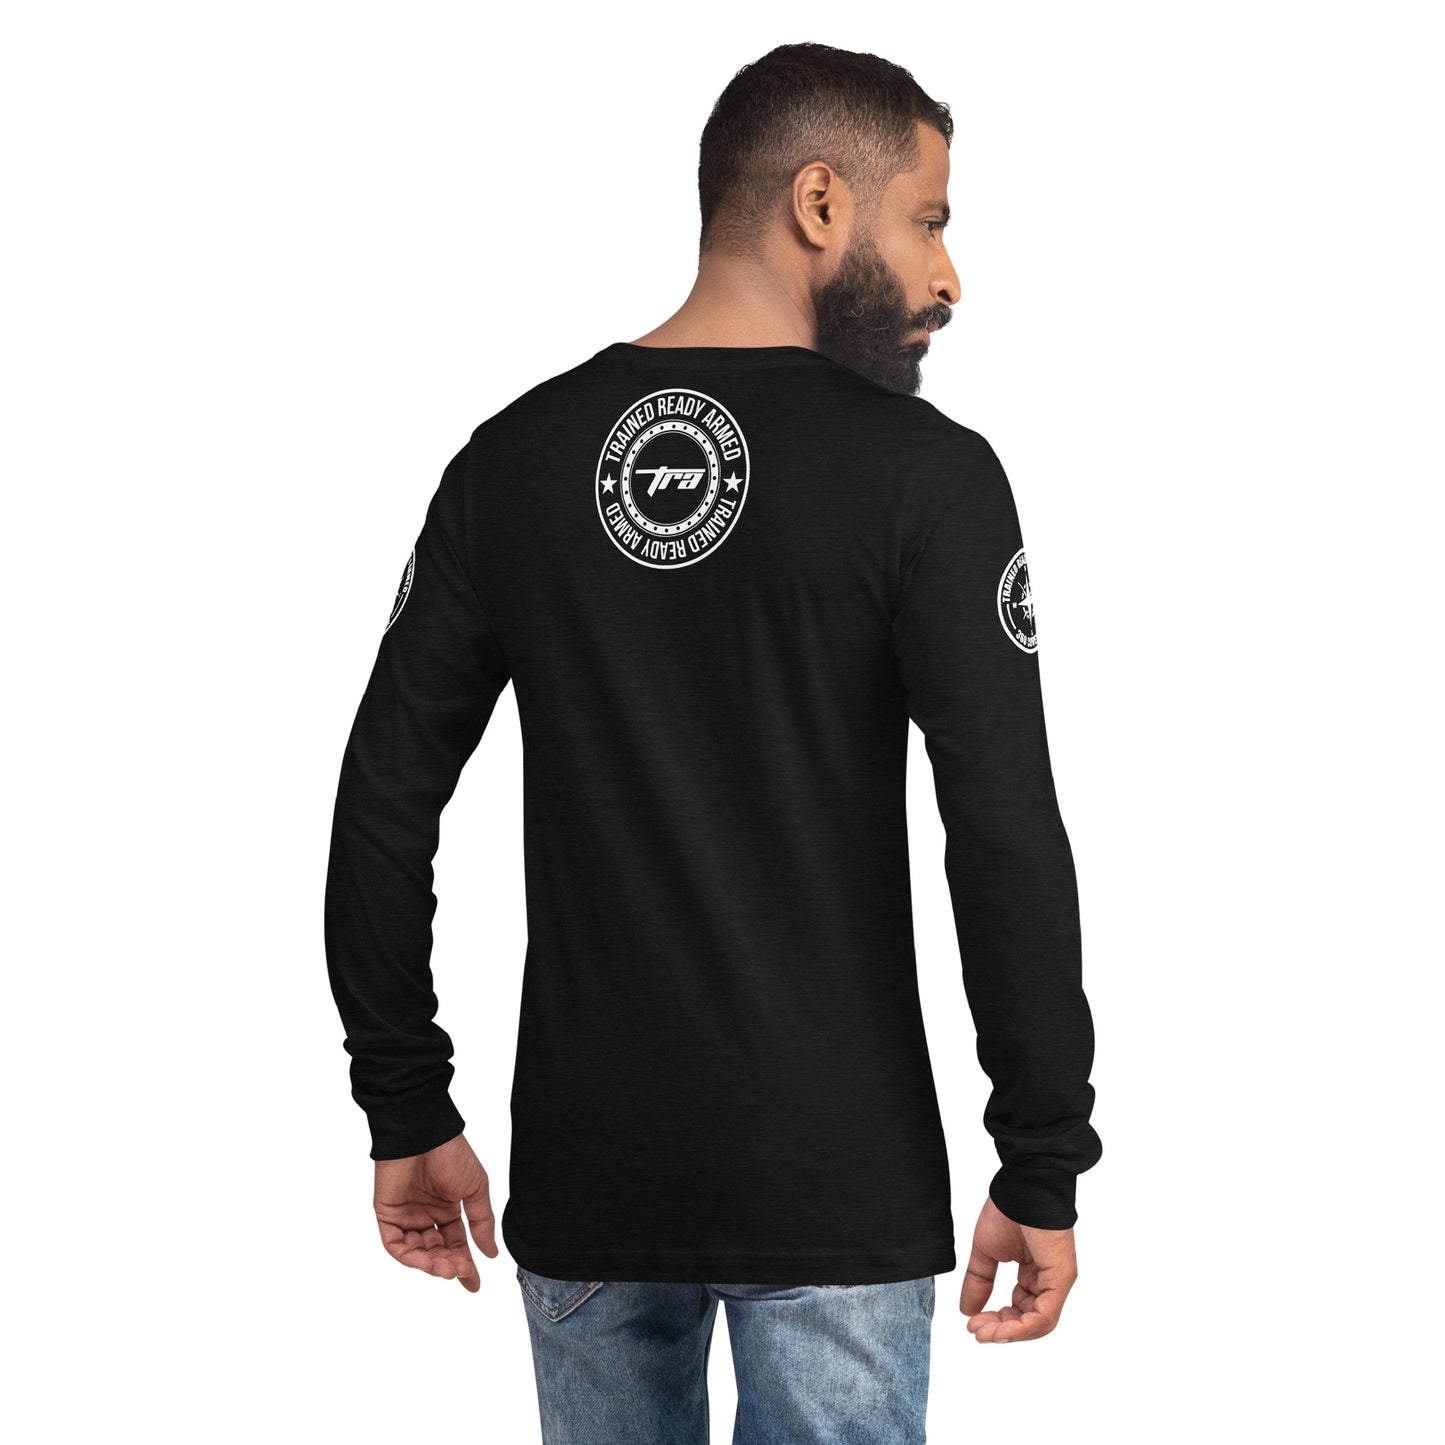 TRAINED READY & ARMED 1.0 MEN'S  Long Sleeve Tee - Trained Ready Armed Apparel